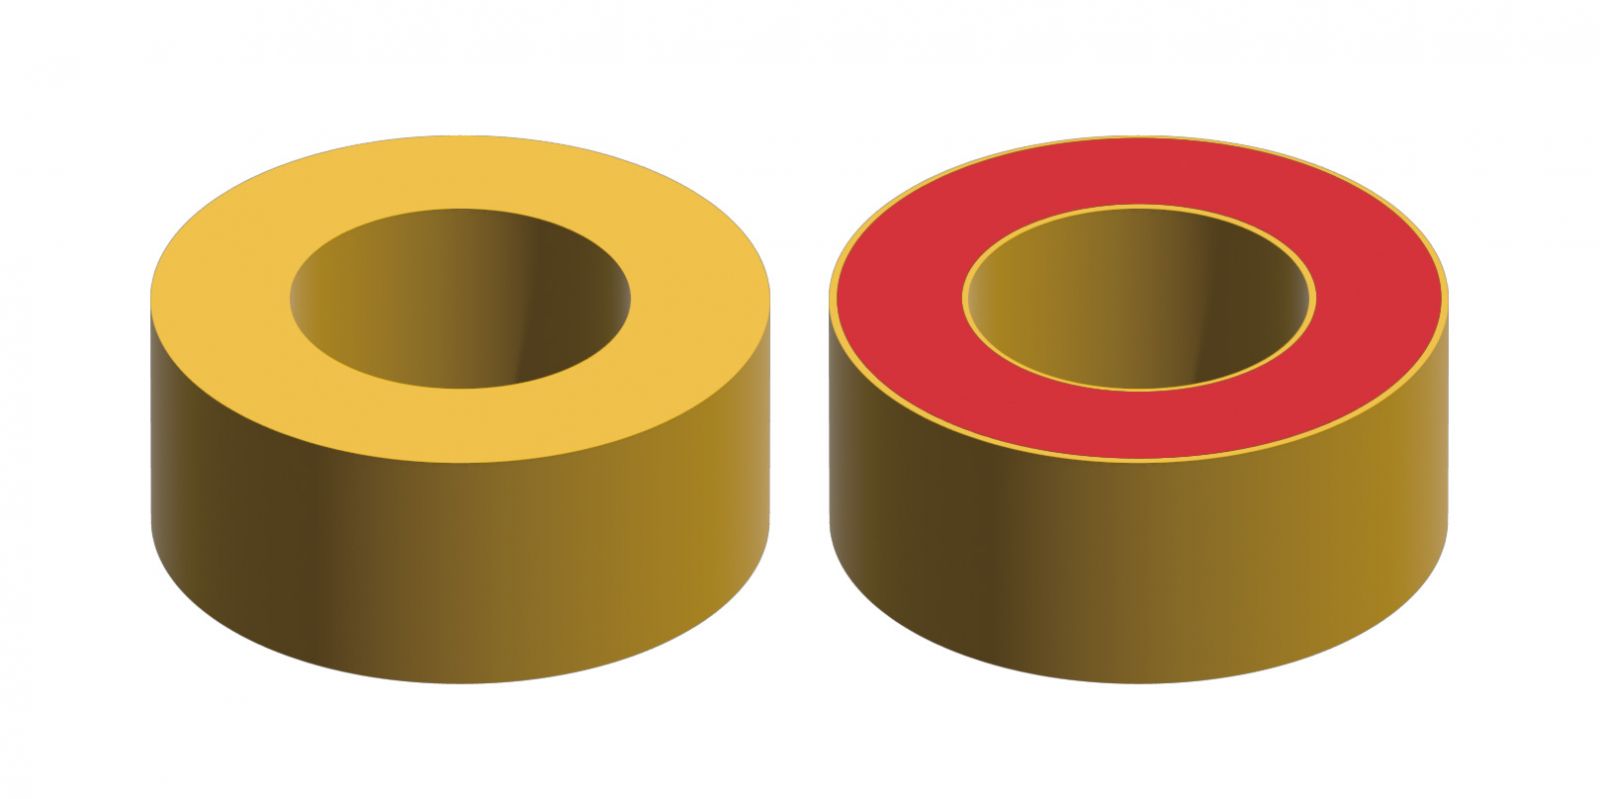 8 material-GOTREND Article-What does the color of the inductor ring mean? High conductivity ring